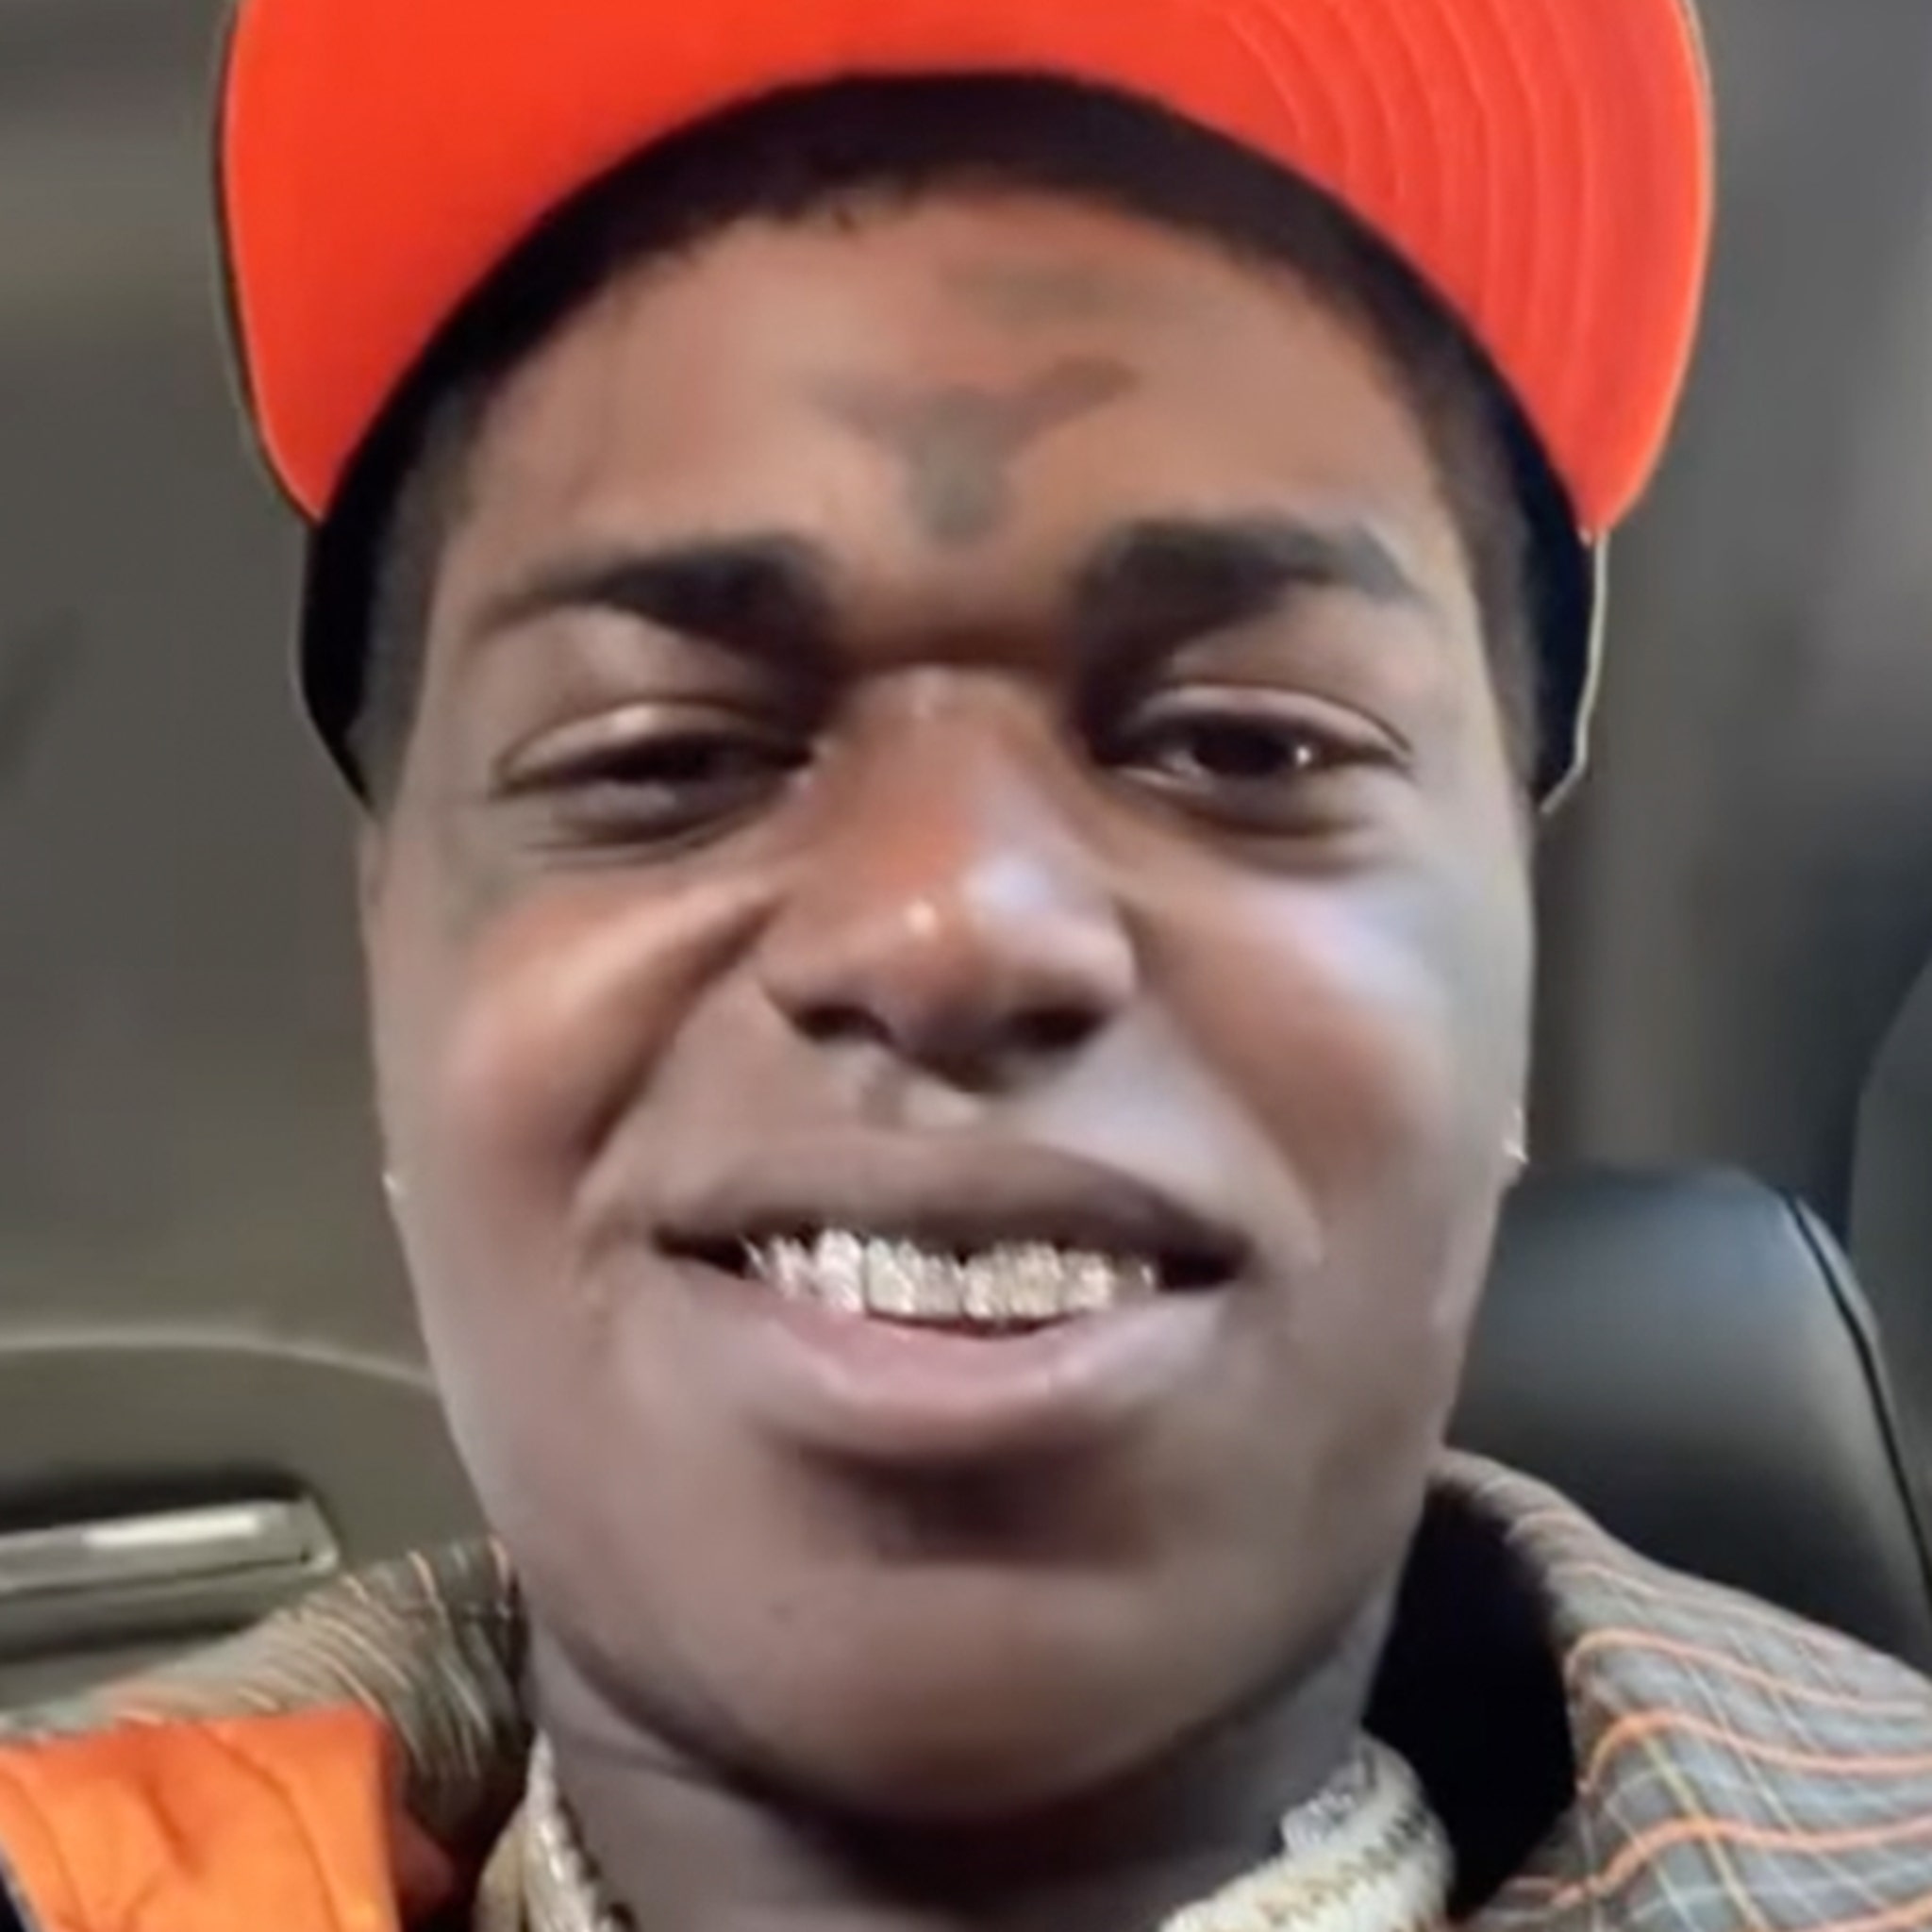 Kodak Black Outfit from July 26, 2021